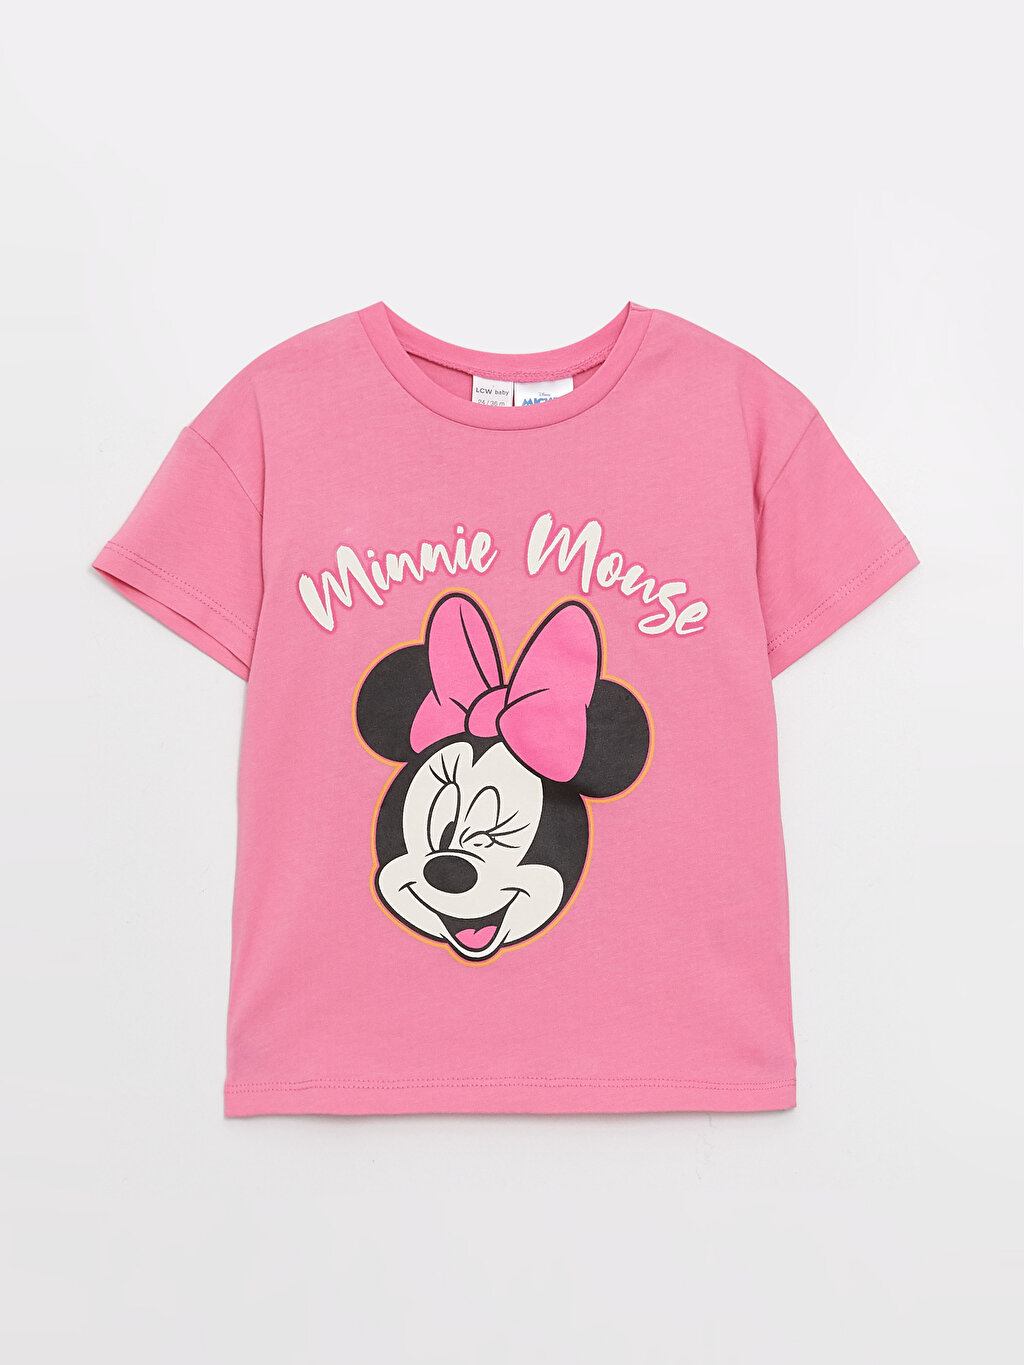 Crew Neck Short Sleeve Minnie Mouse Printed Baby Girl T-Shirt 